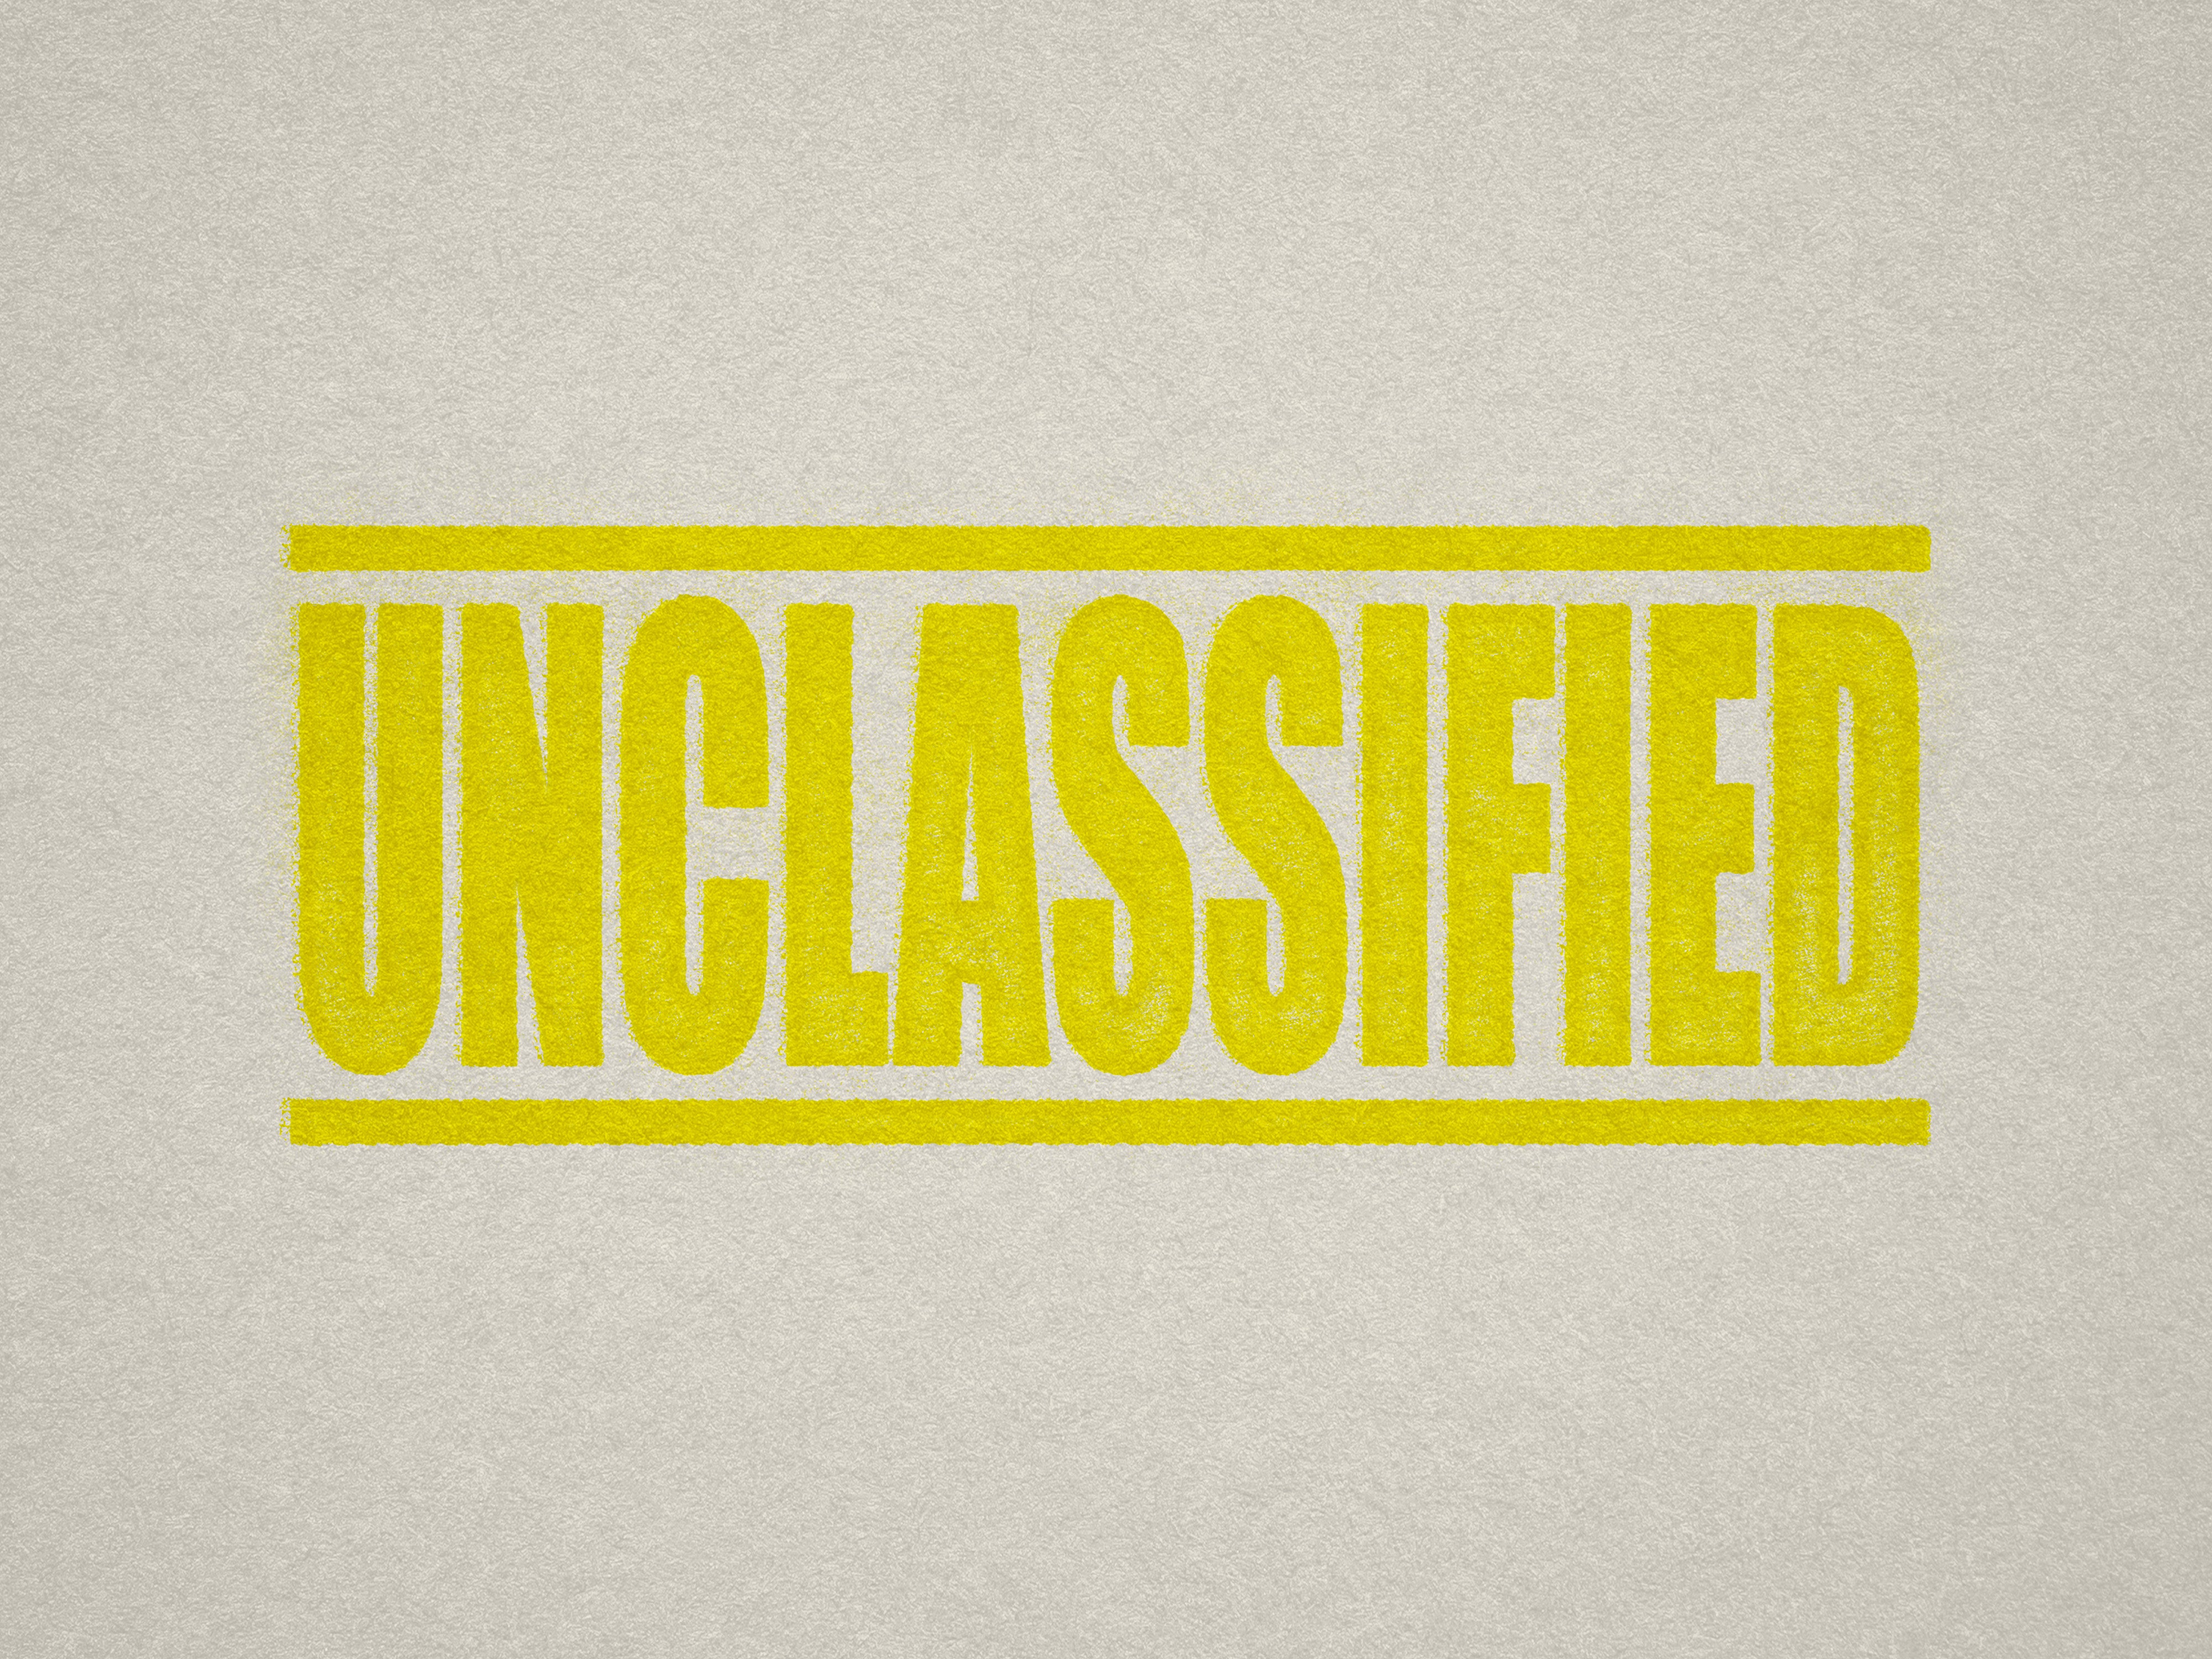 Yellow Label for Unclassified Documents